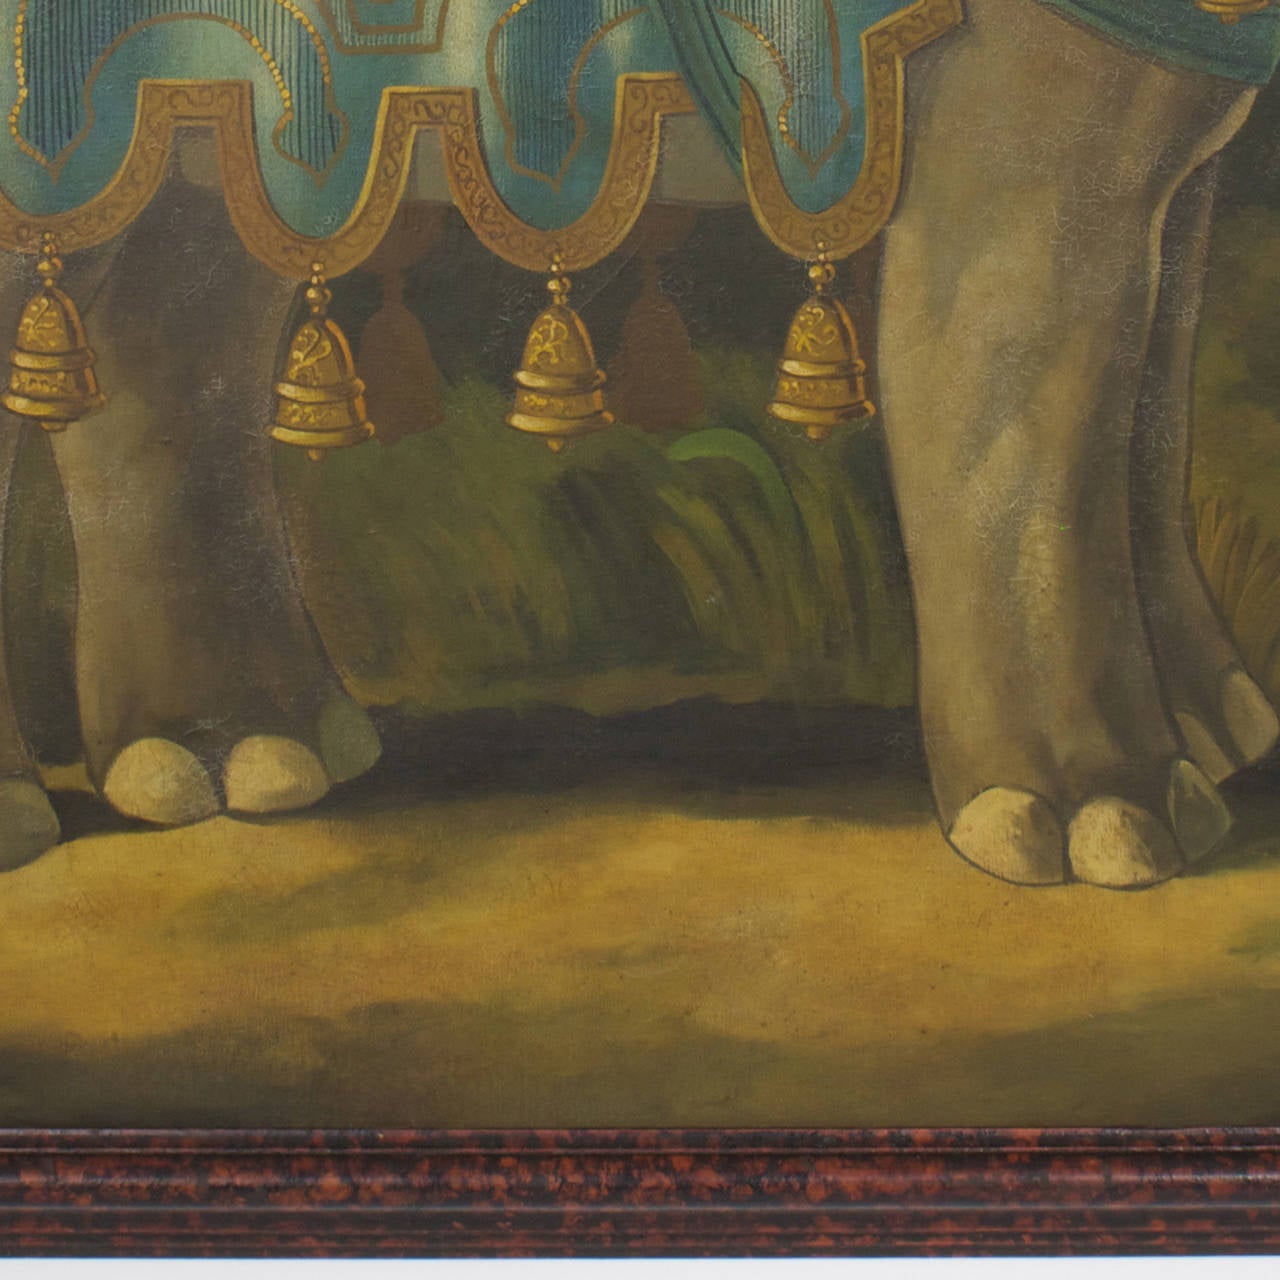 American Large Oil on Canvas Painting of an Attired Elephant Signed Skilling